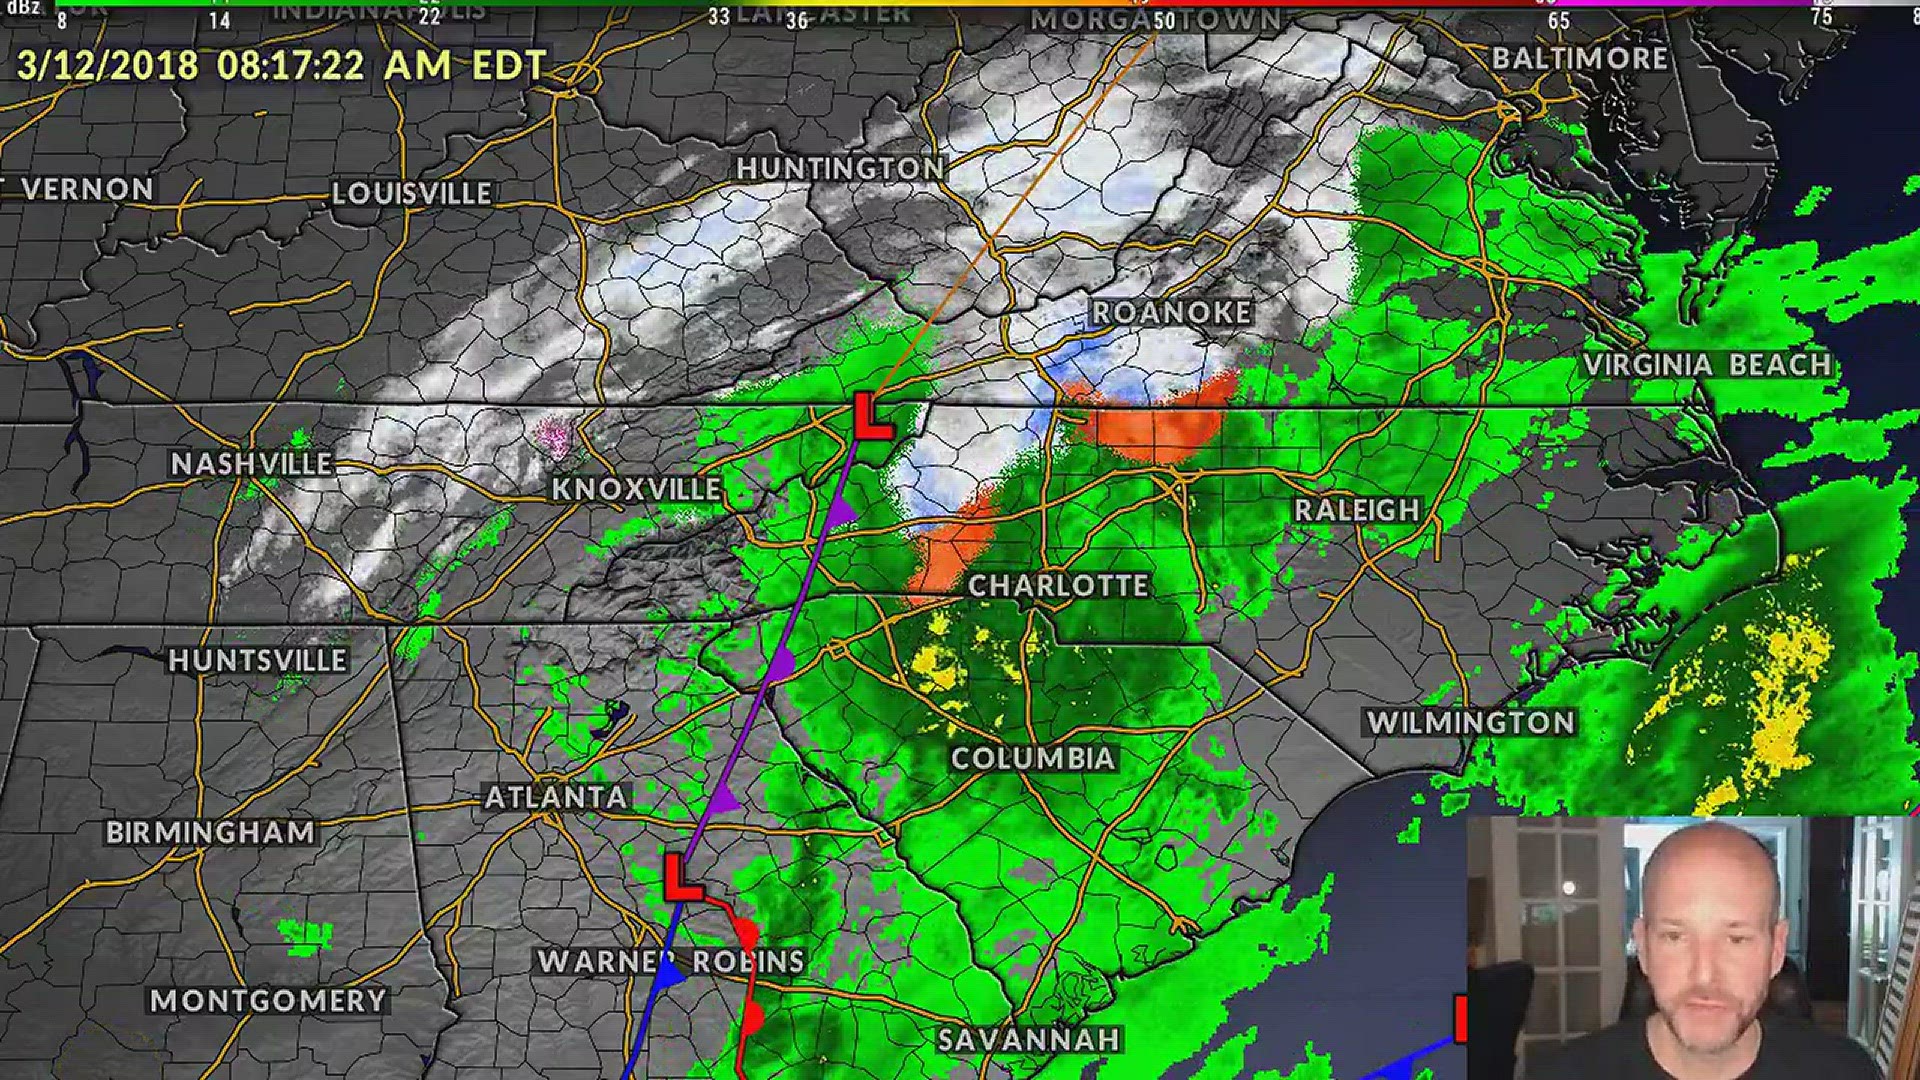 Chief Meteorologist Brad Panovich is tracking the possibility of snow in the Queen City as a winter storm moves across North Carolina.